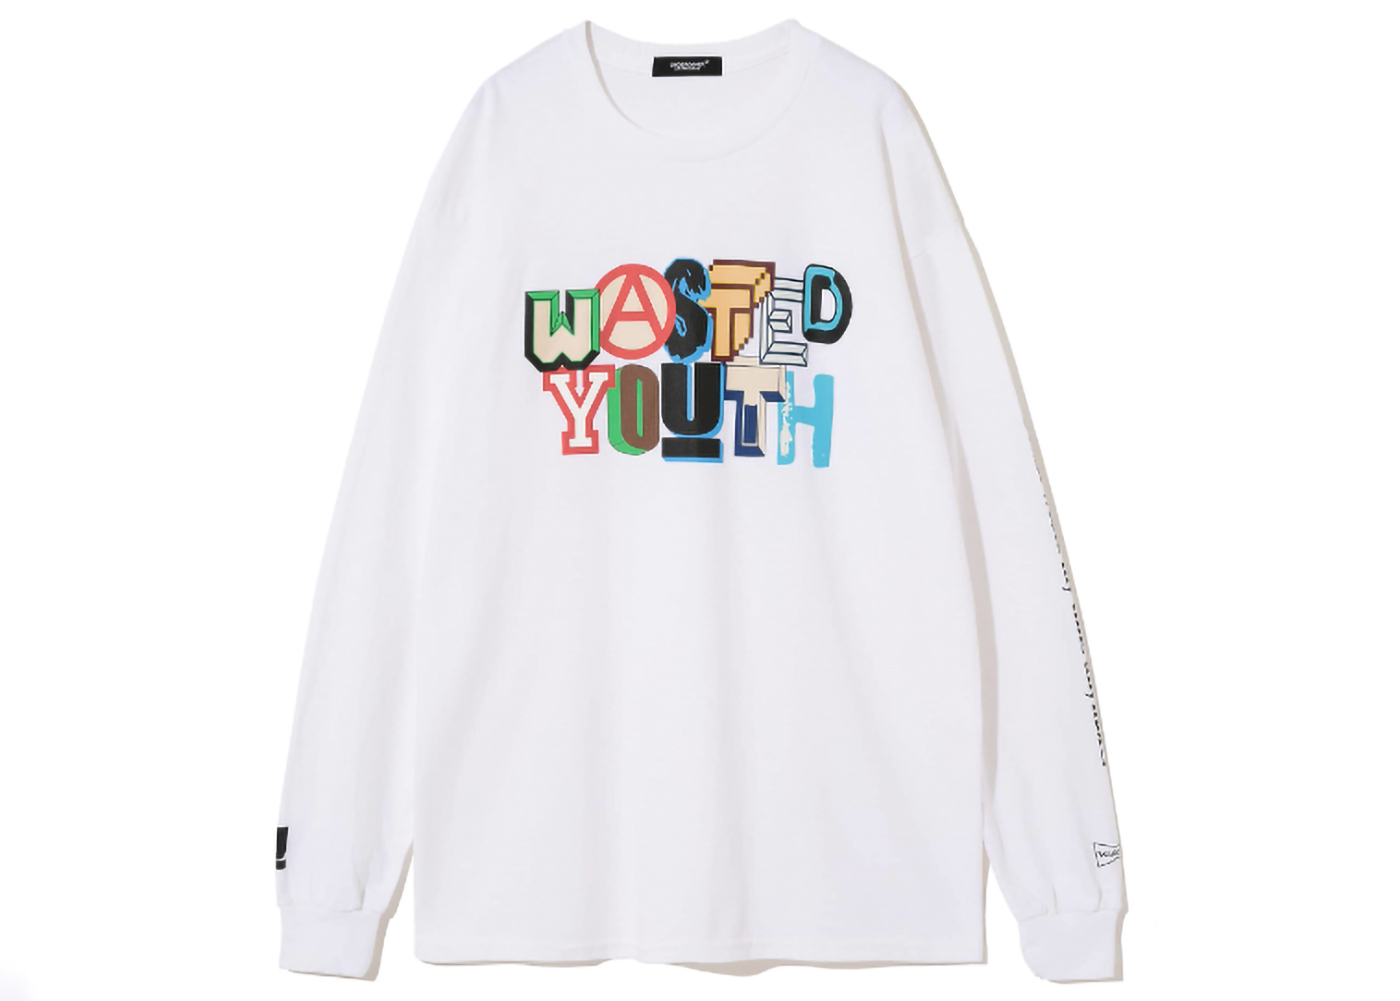 Verdy Wasted Youth White L tシャツ